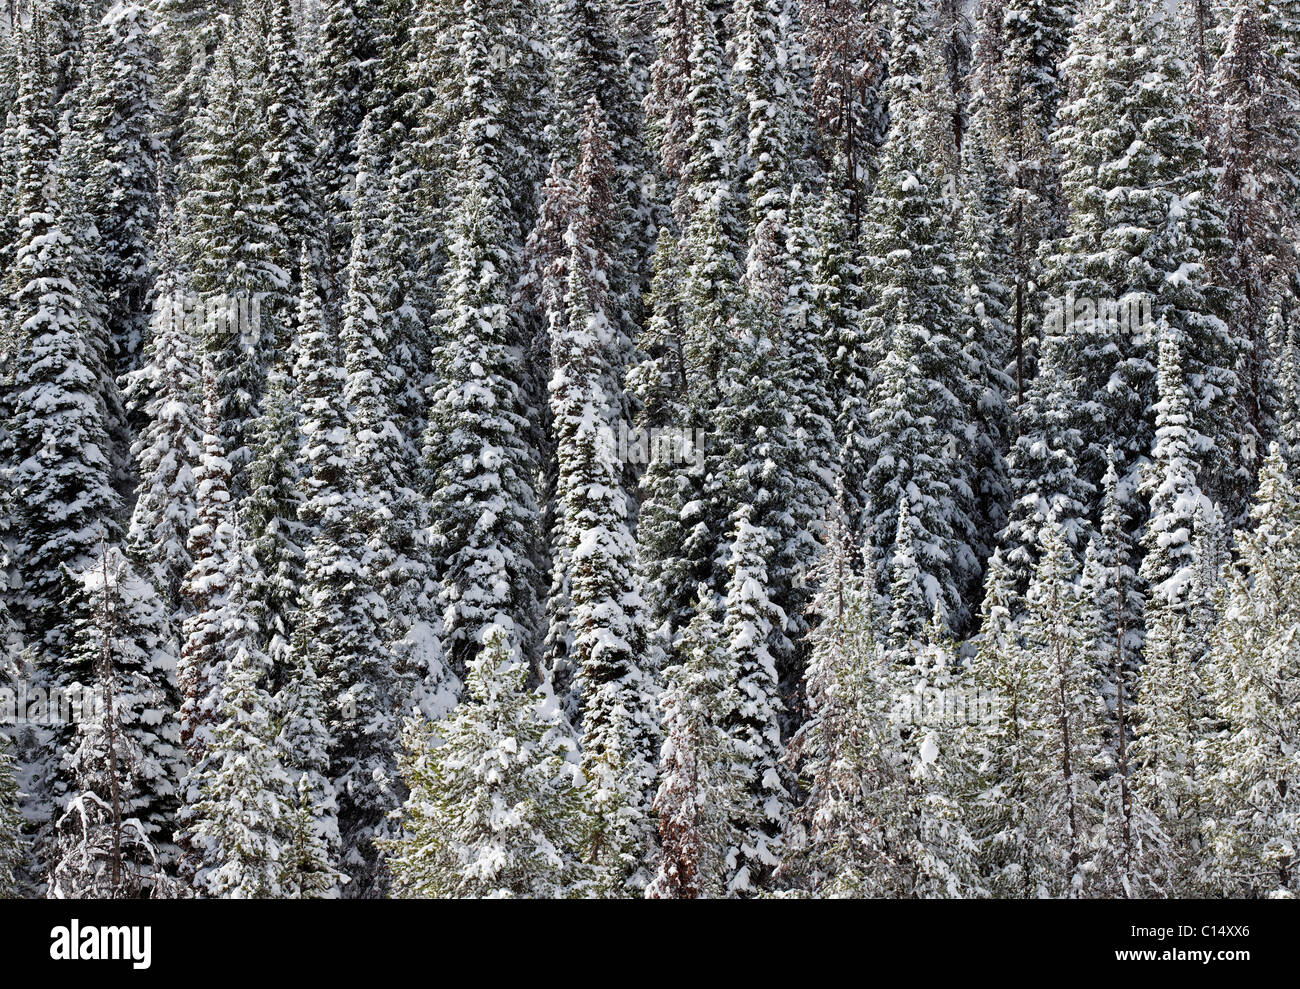 Fresh snow on a thick stand of evergreen trees. Stock Photo